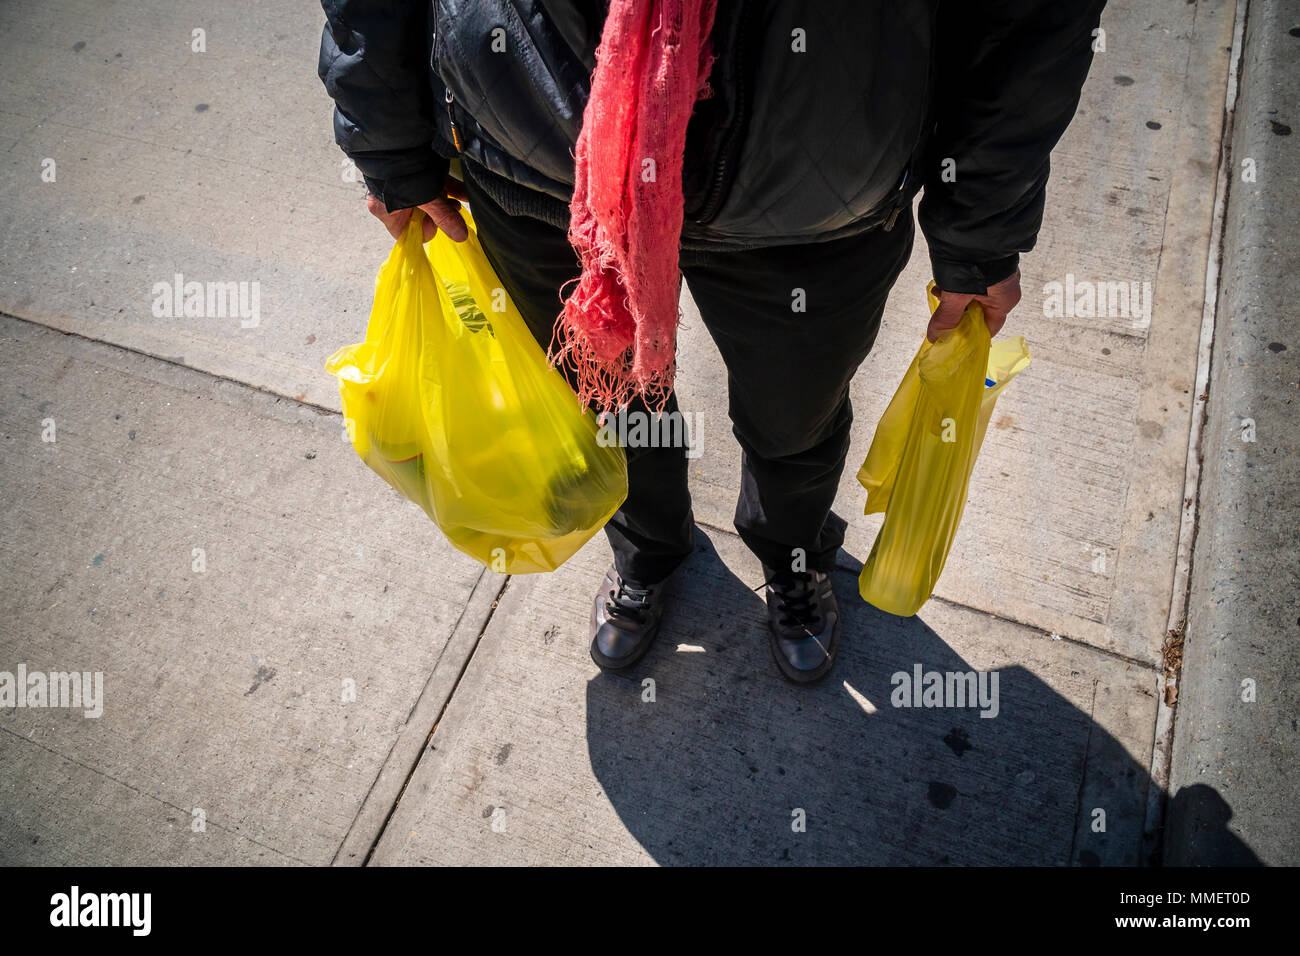 A shopper with her supermarket plastic bags in New York on Thursday, April 26, 2018. New York State Gov. Andrew Cuomo announced his intention to institute a statewide ban on single-use plastic bags, after previously opposing similar legislation proposed by New York City.  (© Richard B. Levine) Stock Photo